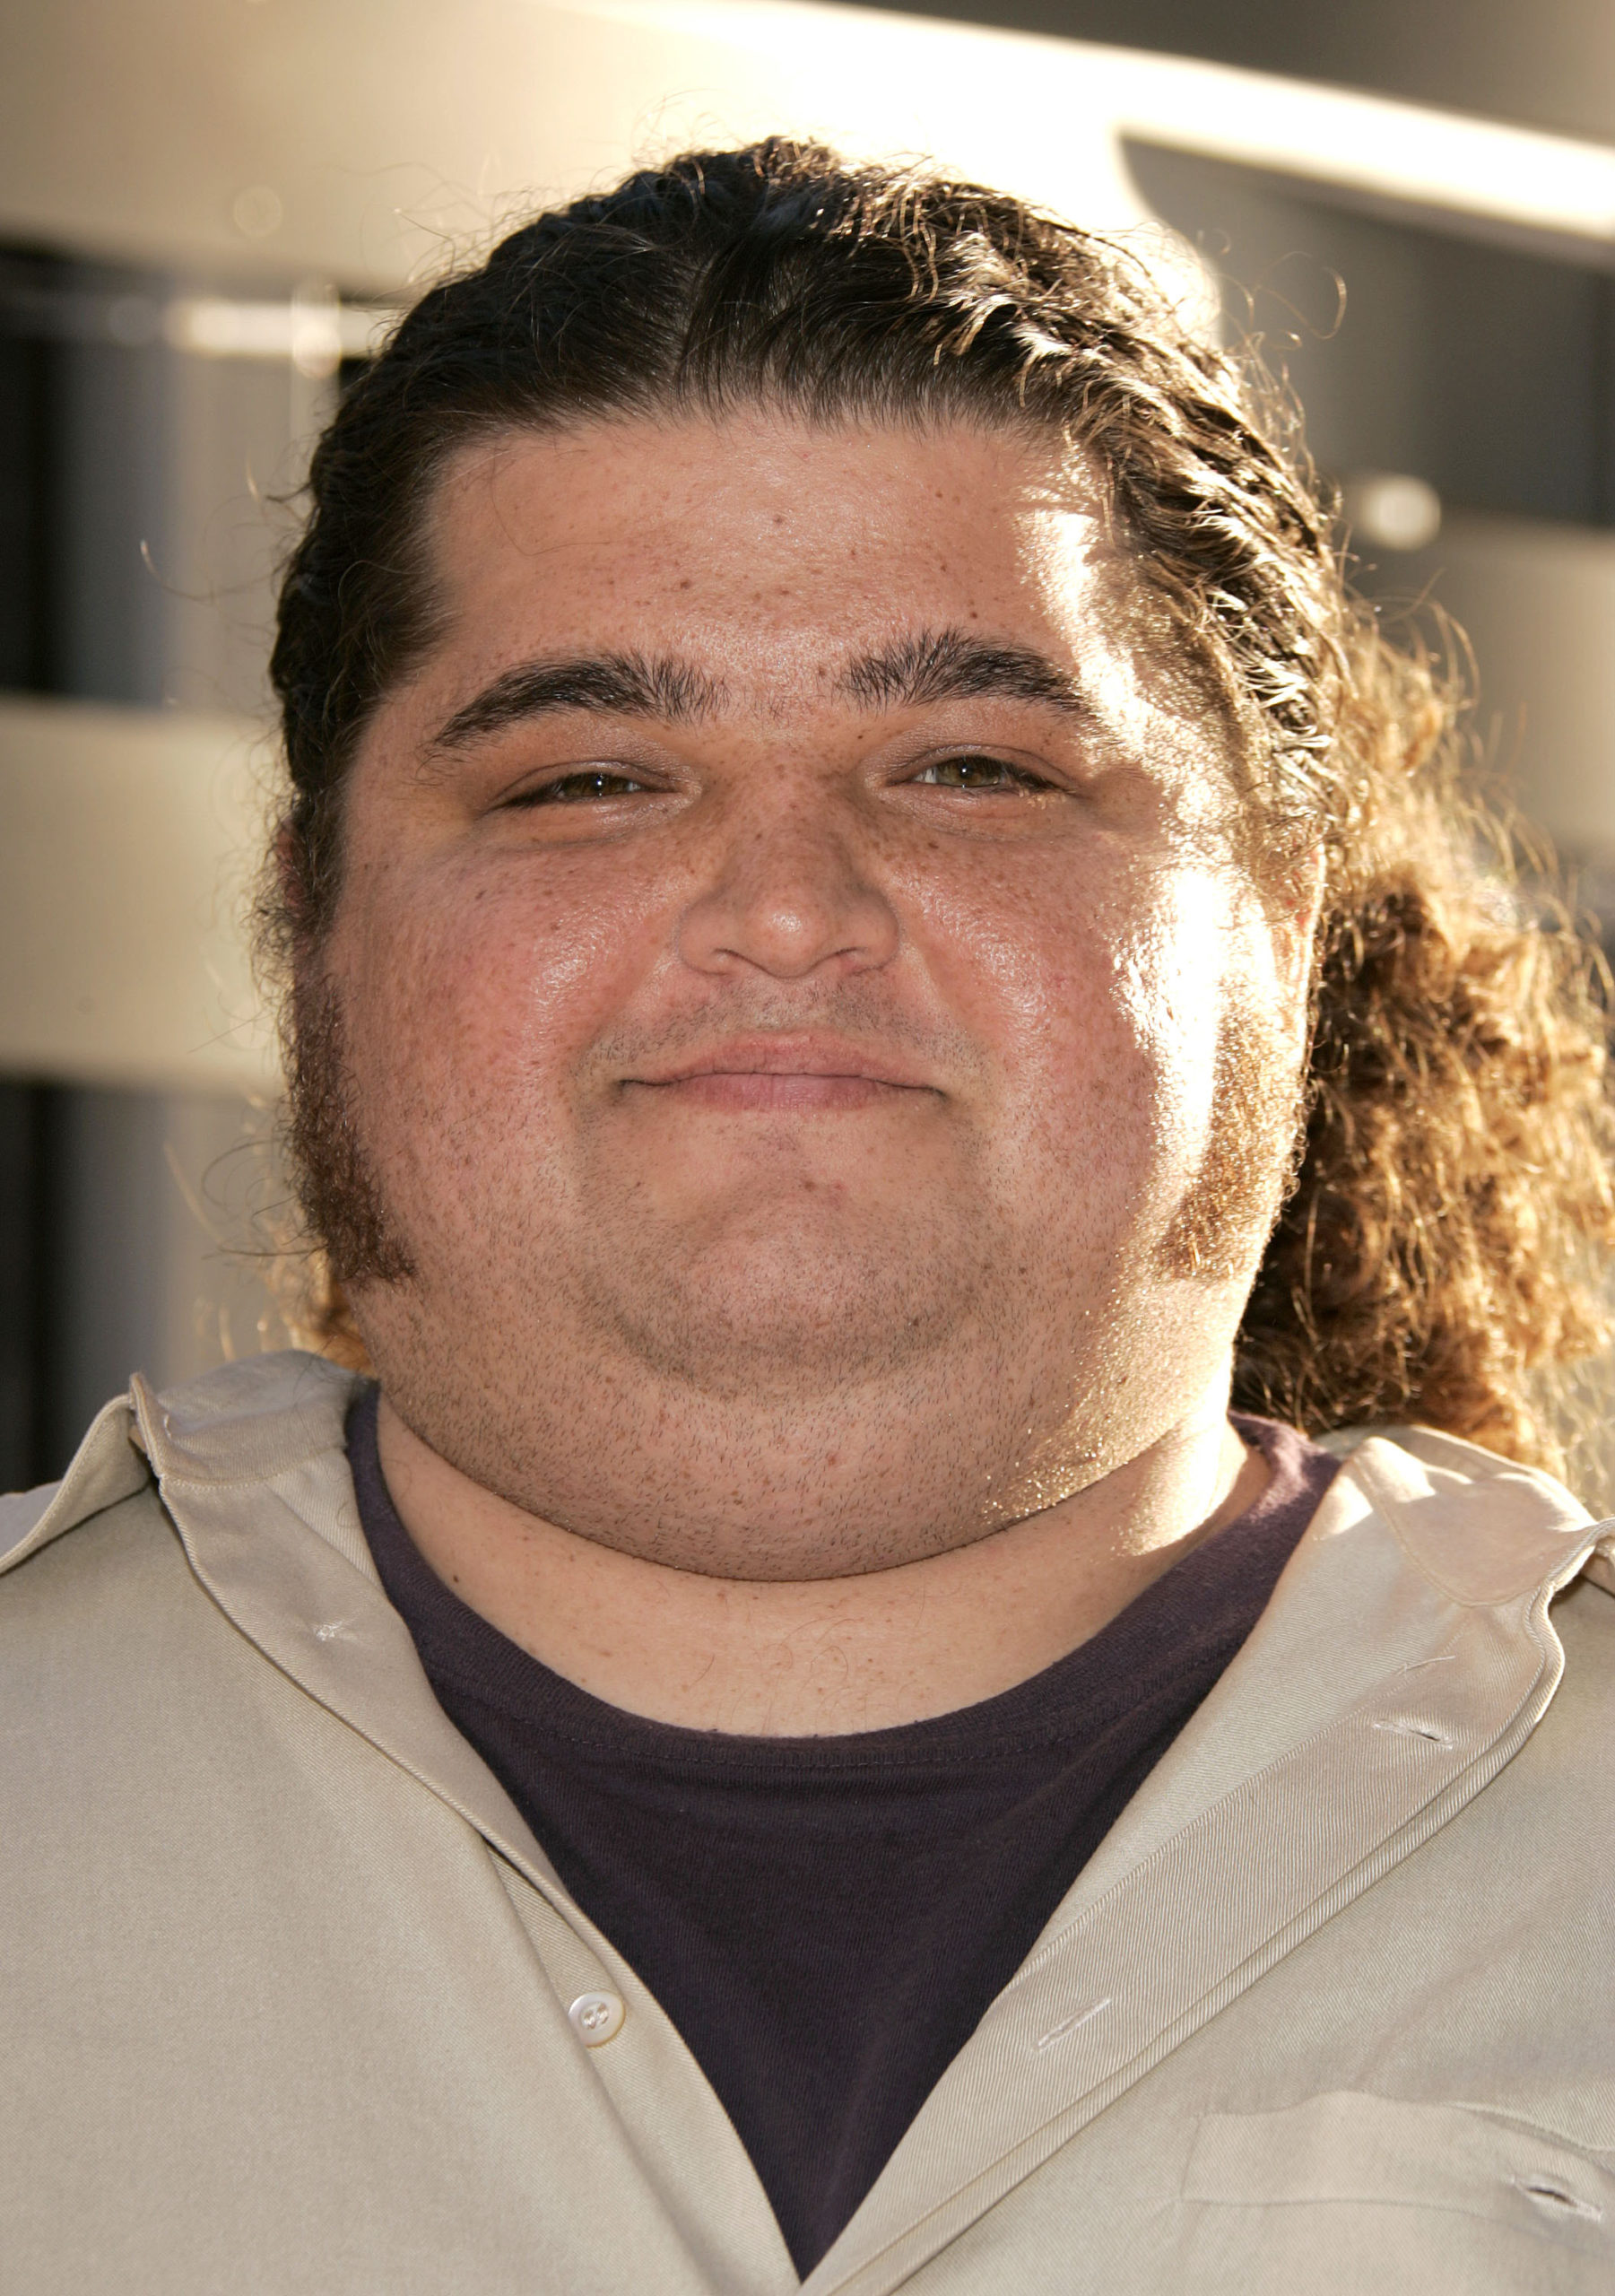 Garcia of Lost is worth 5 million and has lost so much weight